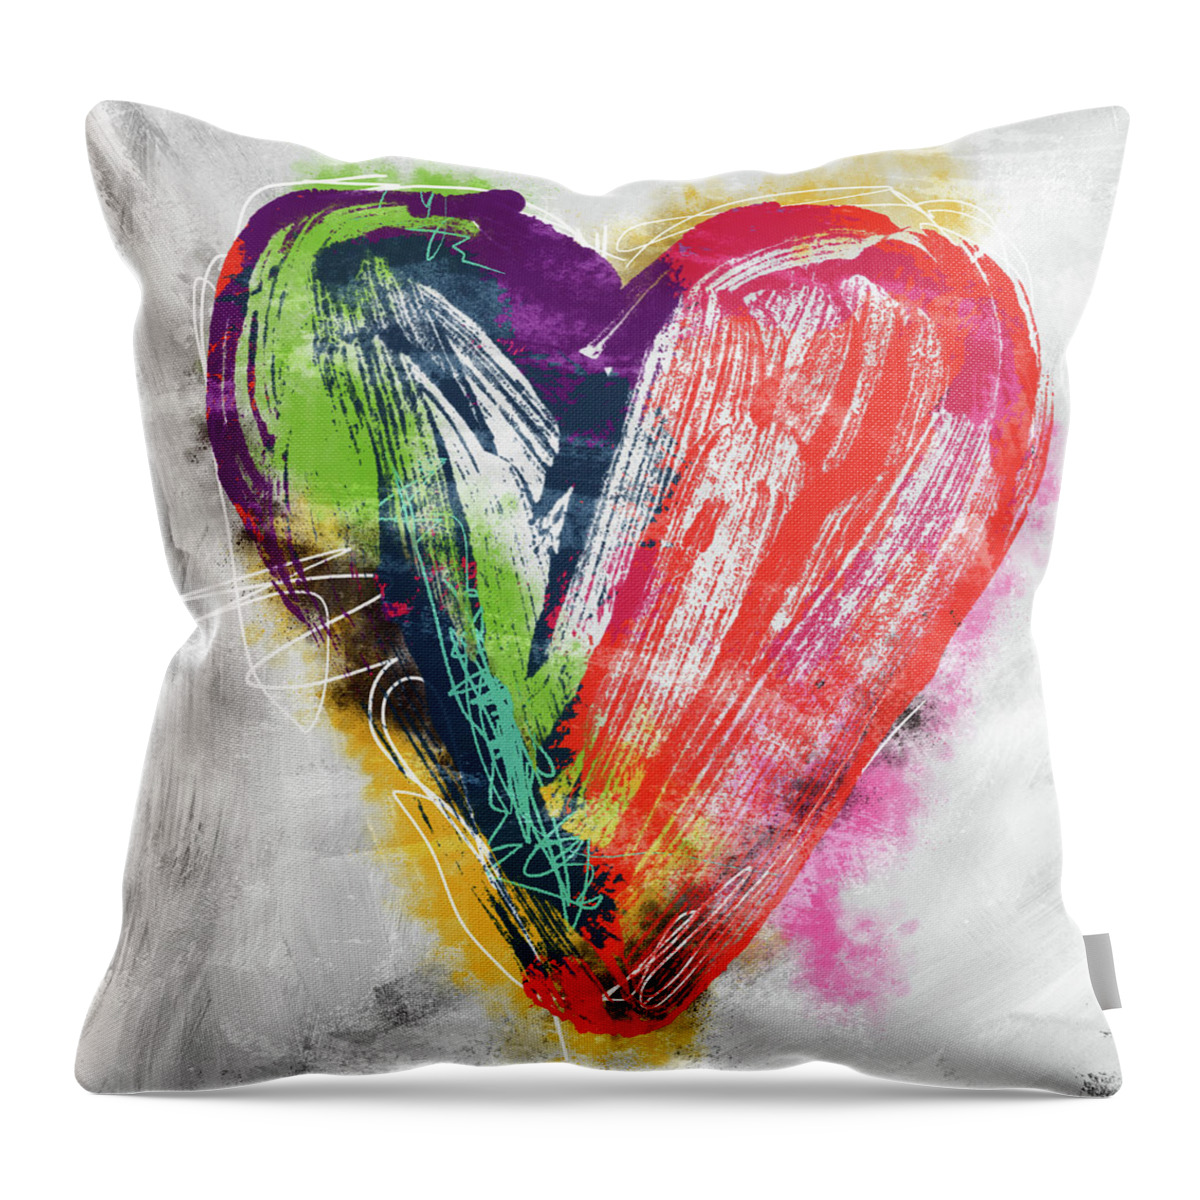 Heart Throw Pillow featuring the mixed media Electric Love- Expressionist Art by Linda Woods by Linda Woods